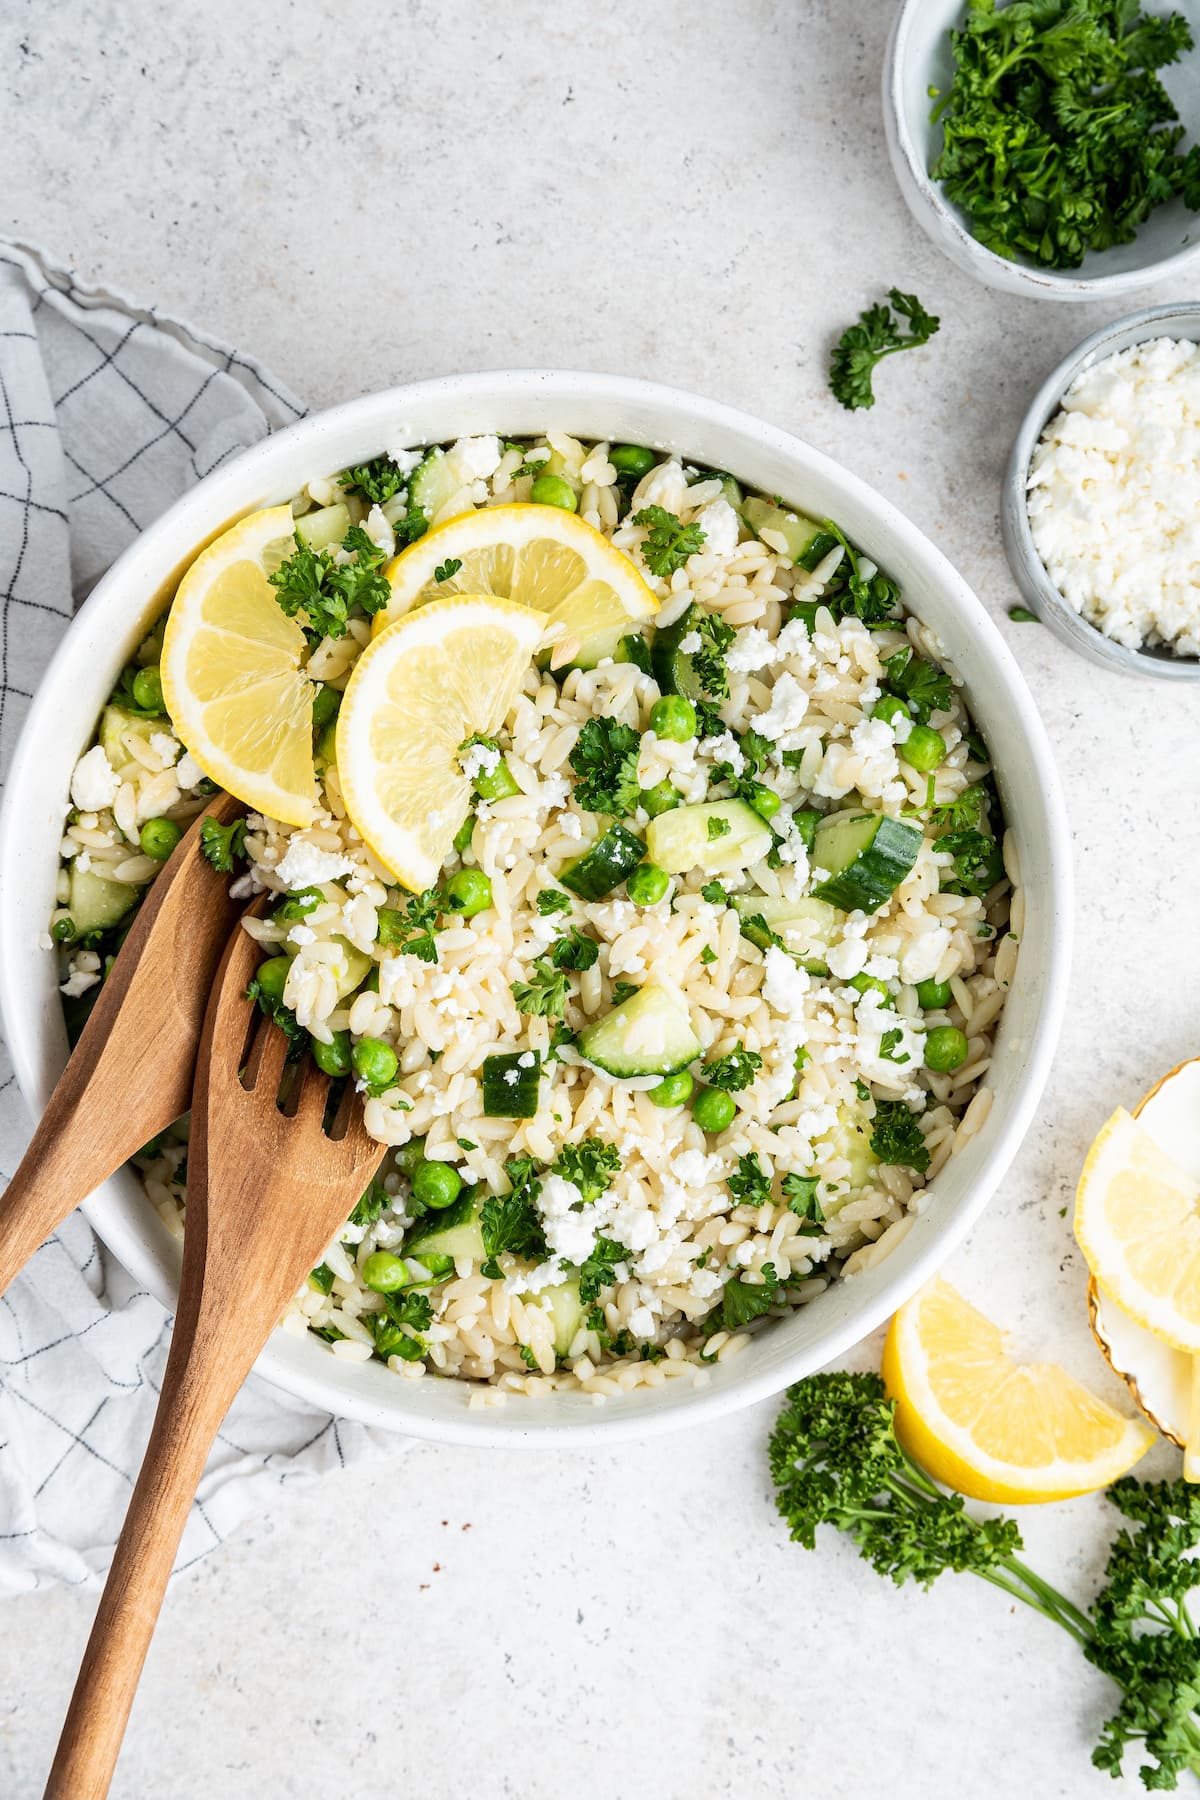 Lemon orzo salad with fresh lemon slices in a white bowl with wooden serving spoons.